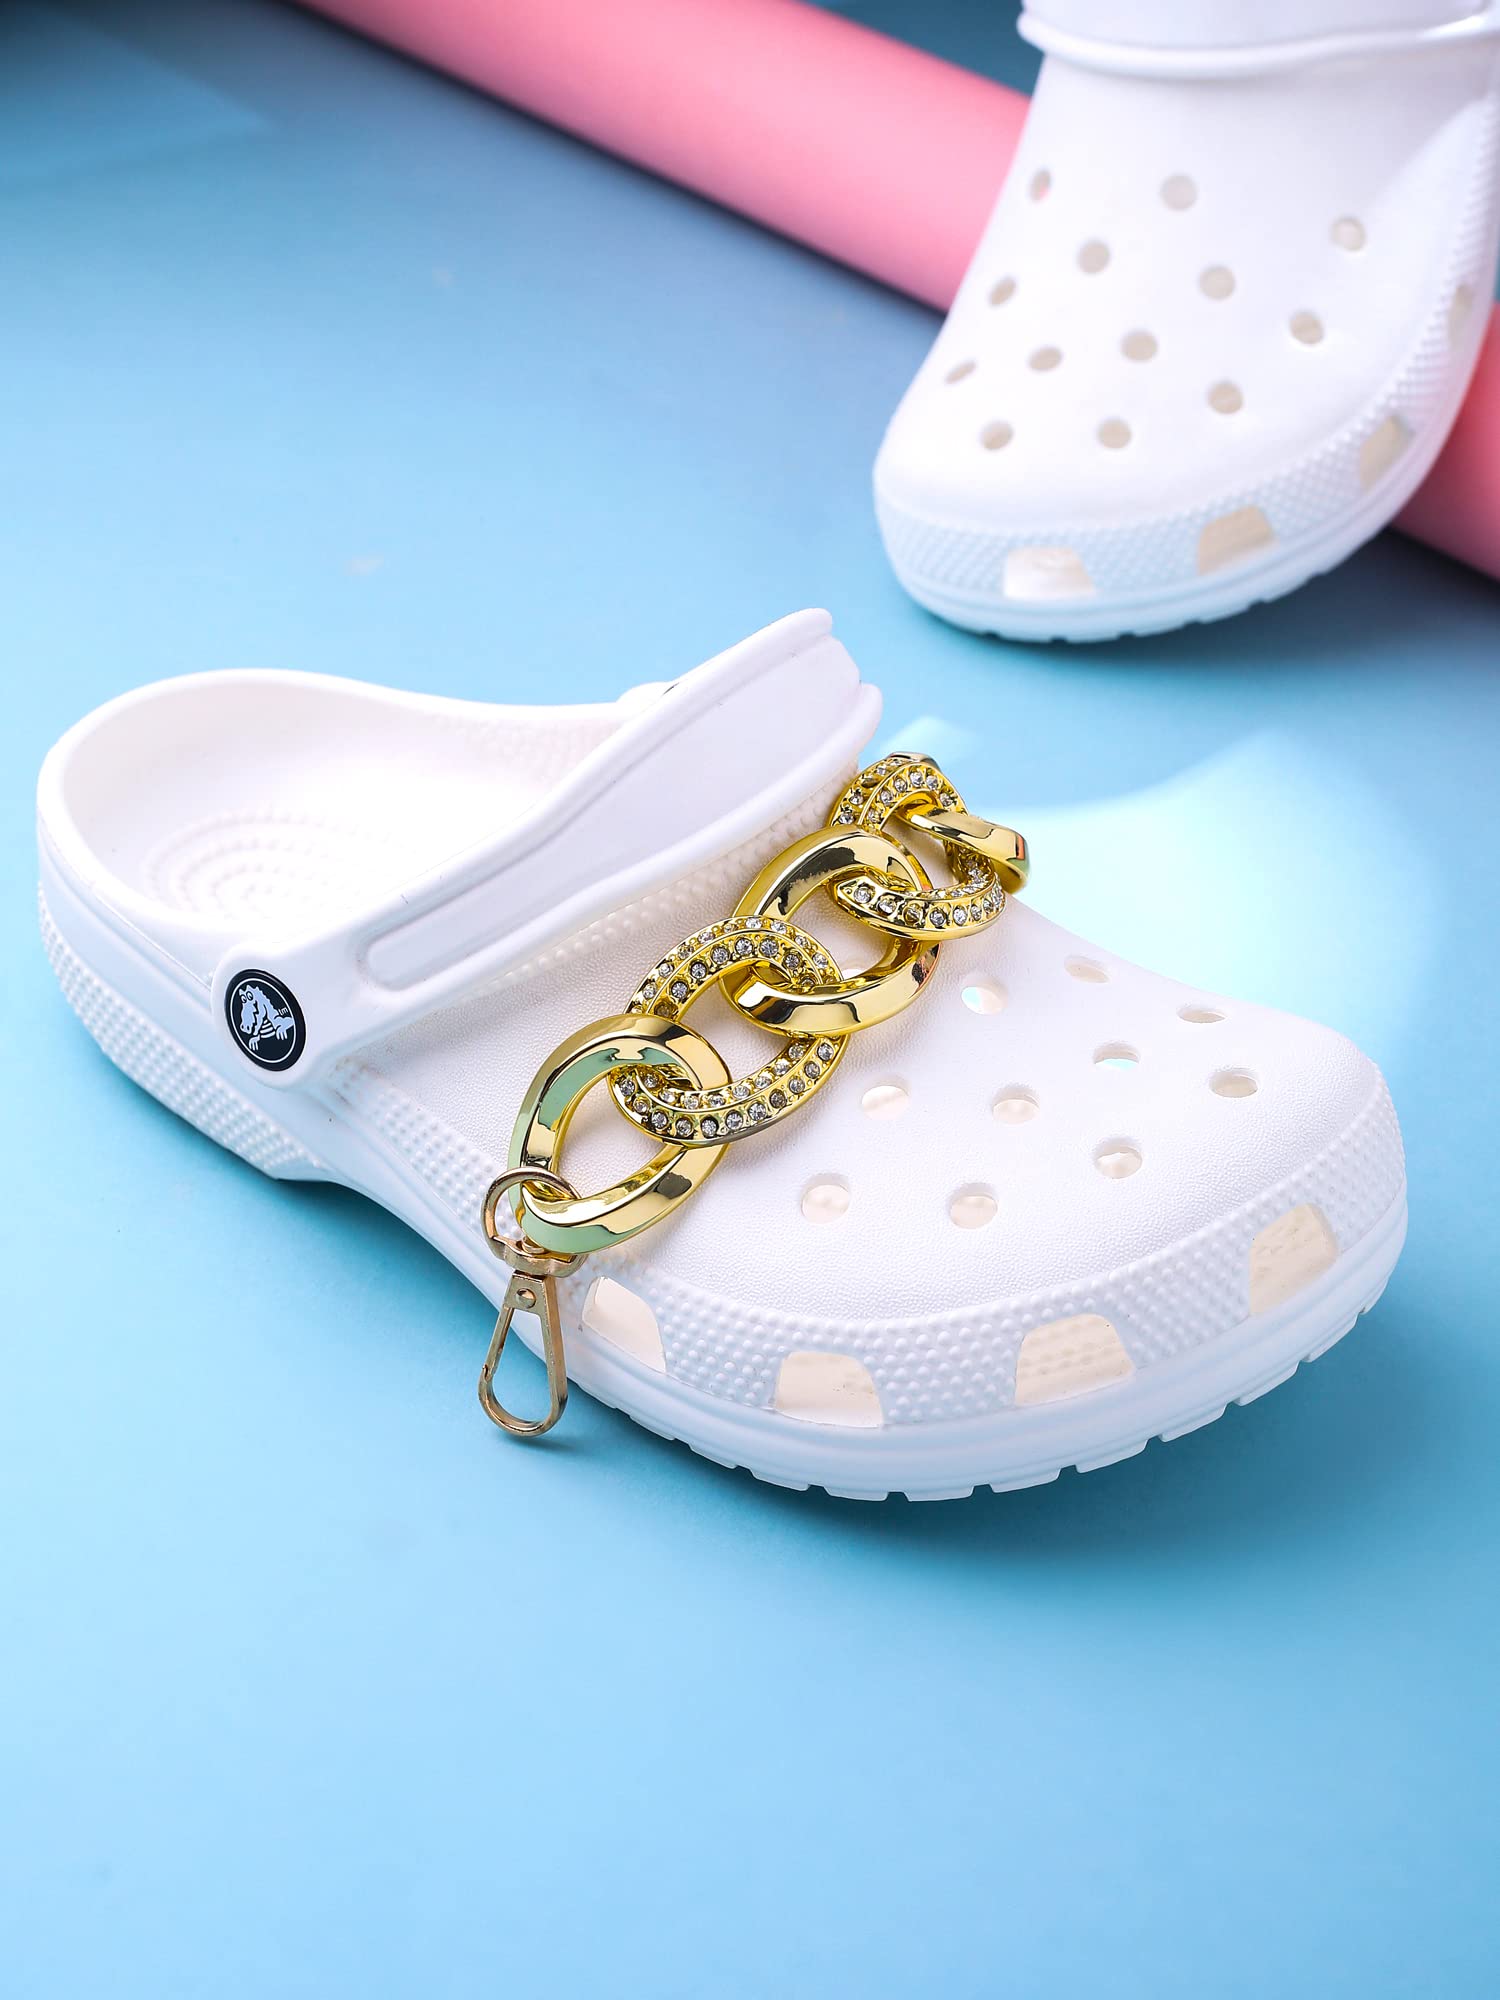 Yellow Chimes Shoe Chains for Girls and Boys | Shoe Accessories Link Chain and Crystal Design | Shoe Decoration Charms| Shoe Chains for Unisex | Pack of 2 pieces | Shoe Chain Charms for Croc